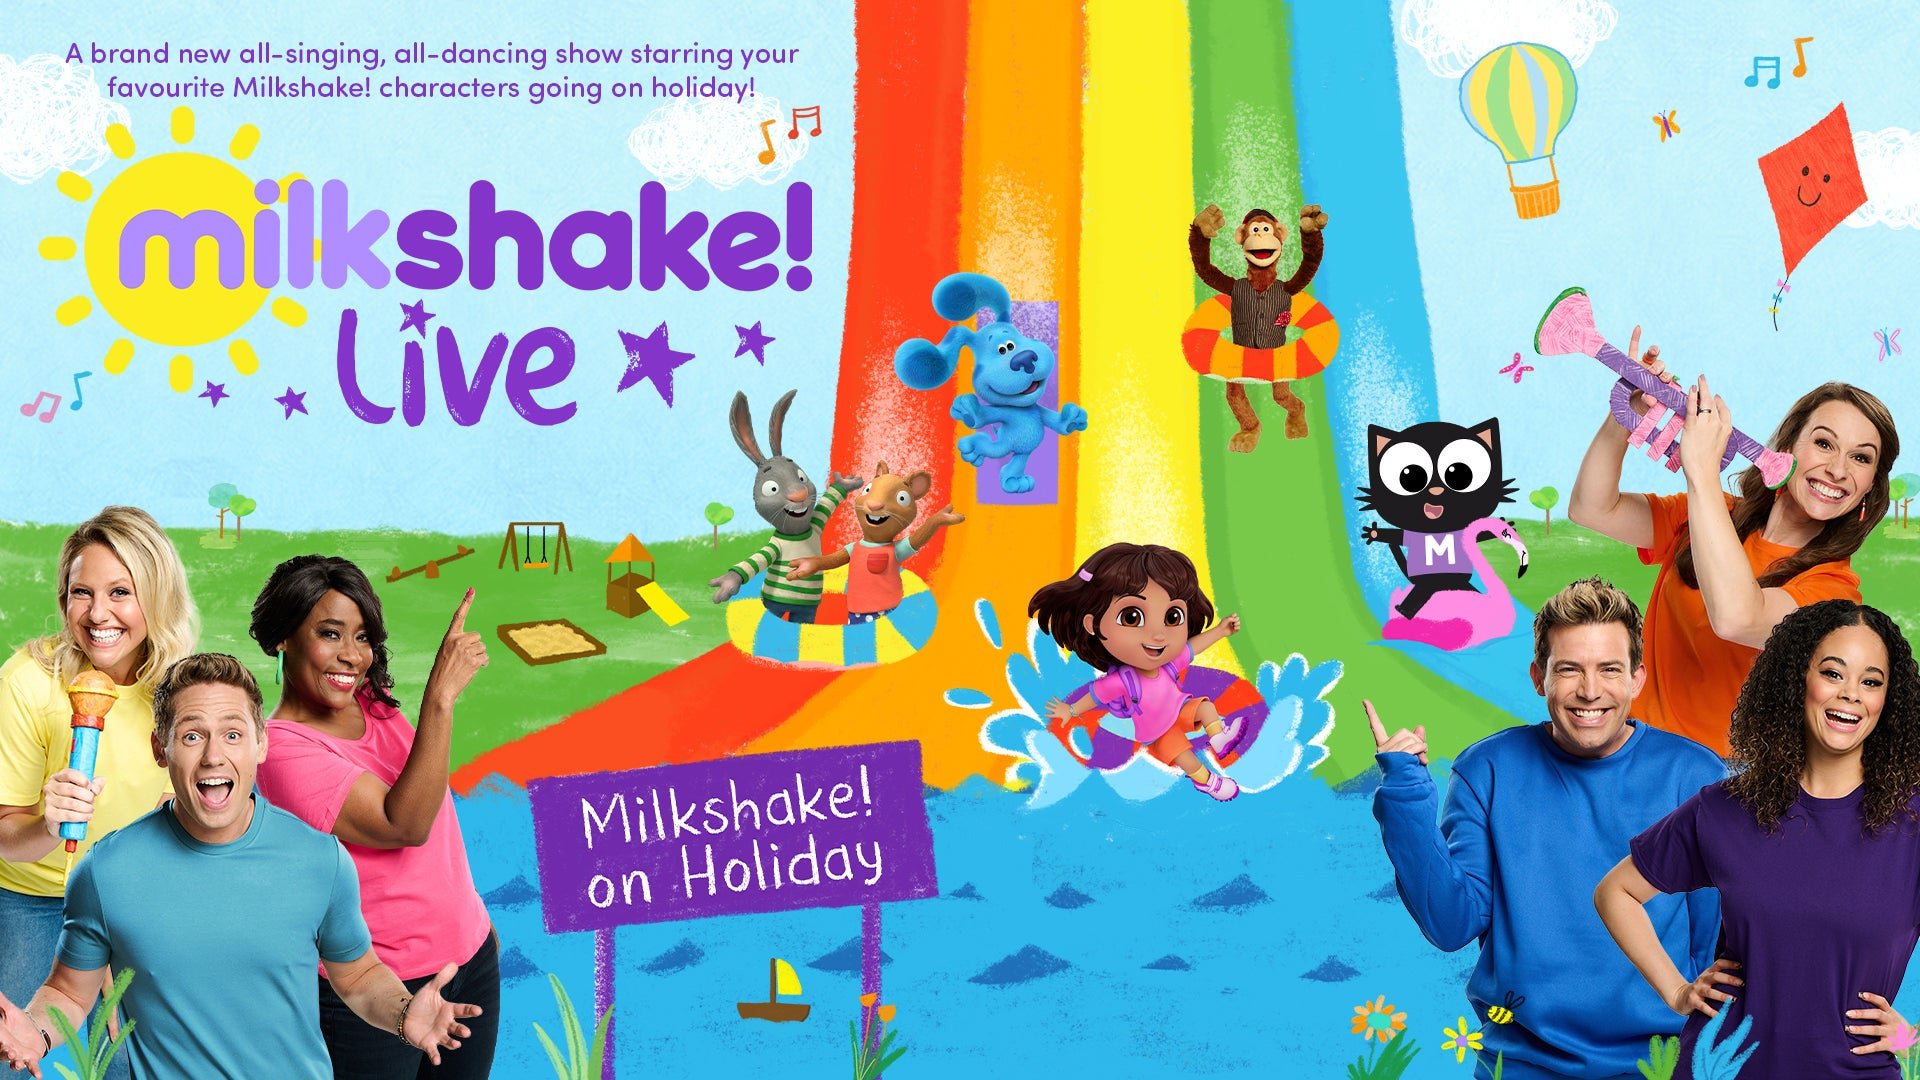 Image name Milkshake Live on Holiday at Scarborough Spa Theatre Scarborough the 14 image from the post Milkshake! Live on Holiday at Scarborough Spa Grand Hall, Scarborough in Yorkshire.com.